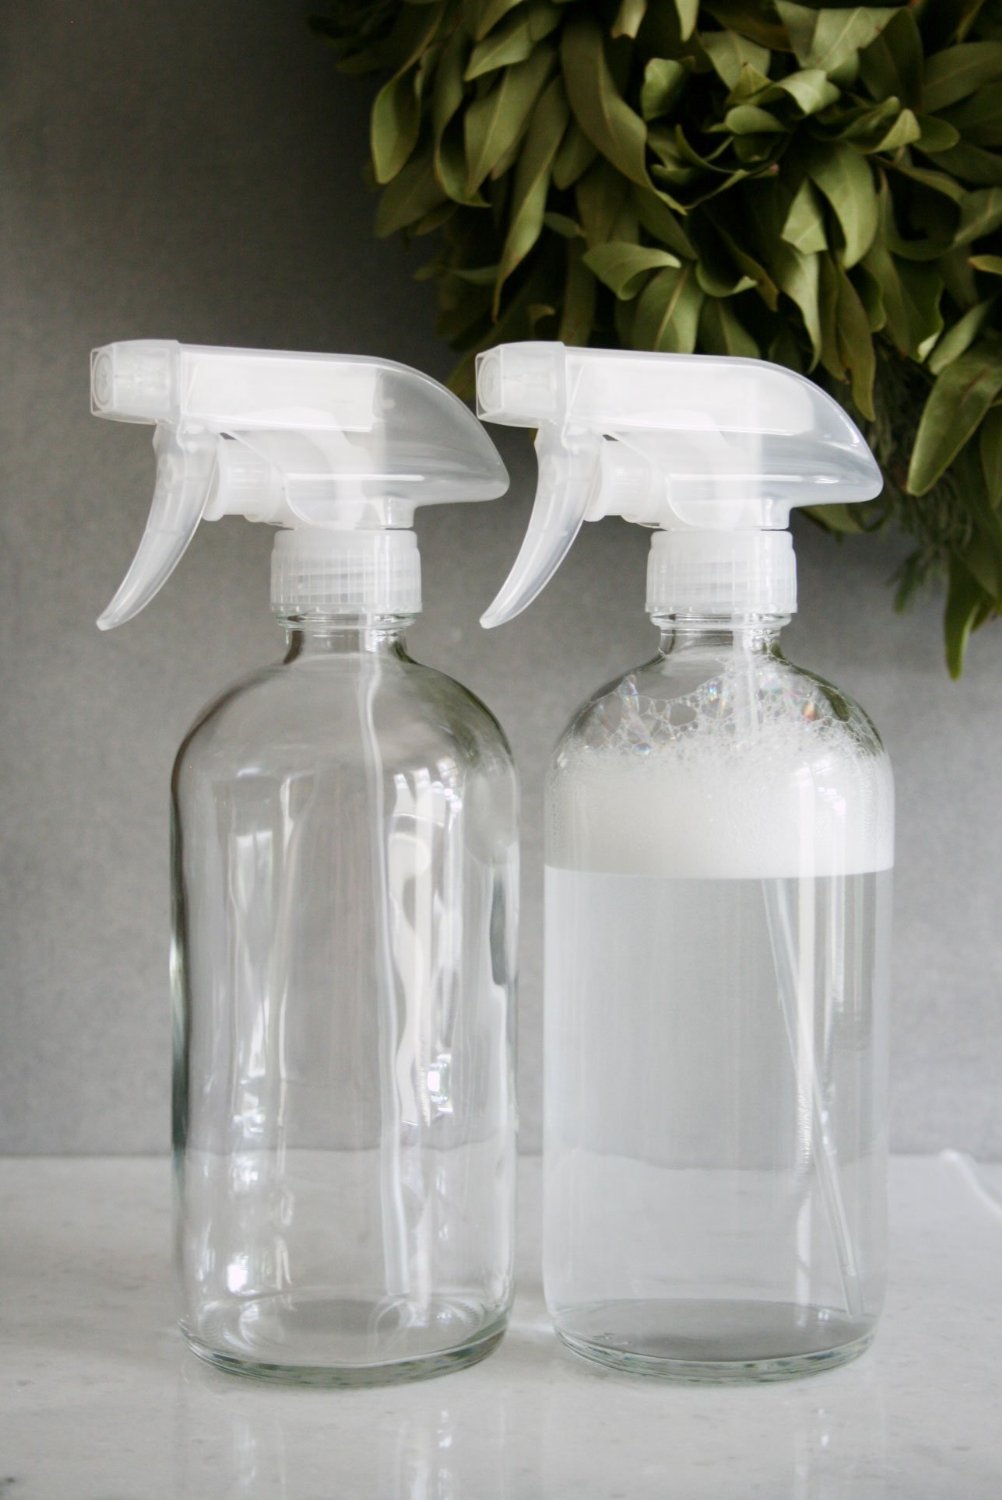 Glass Spray Cleaning Bottles | Rail19 | Great for Essential Oils, Natural Pet Sprays and Cleaning Sprays